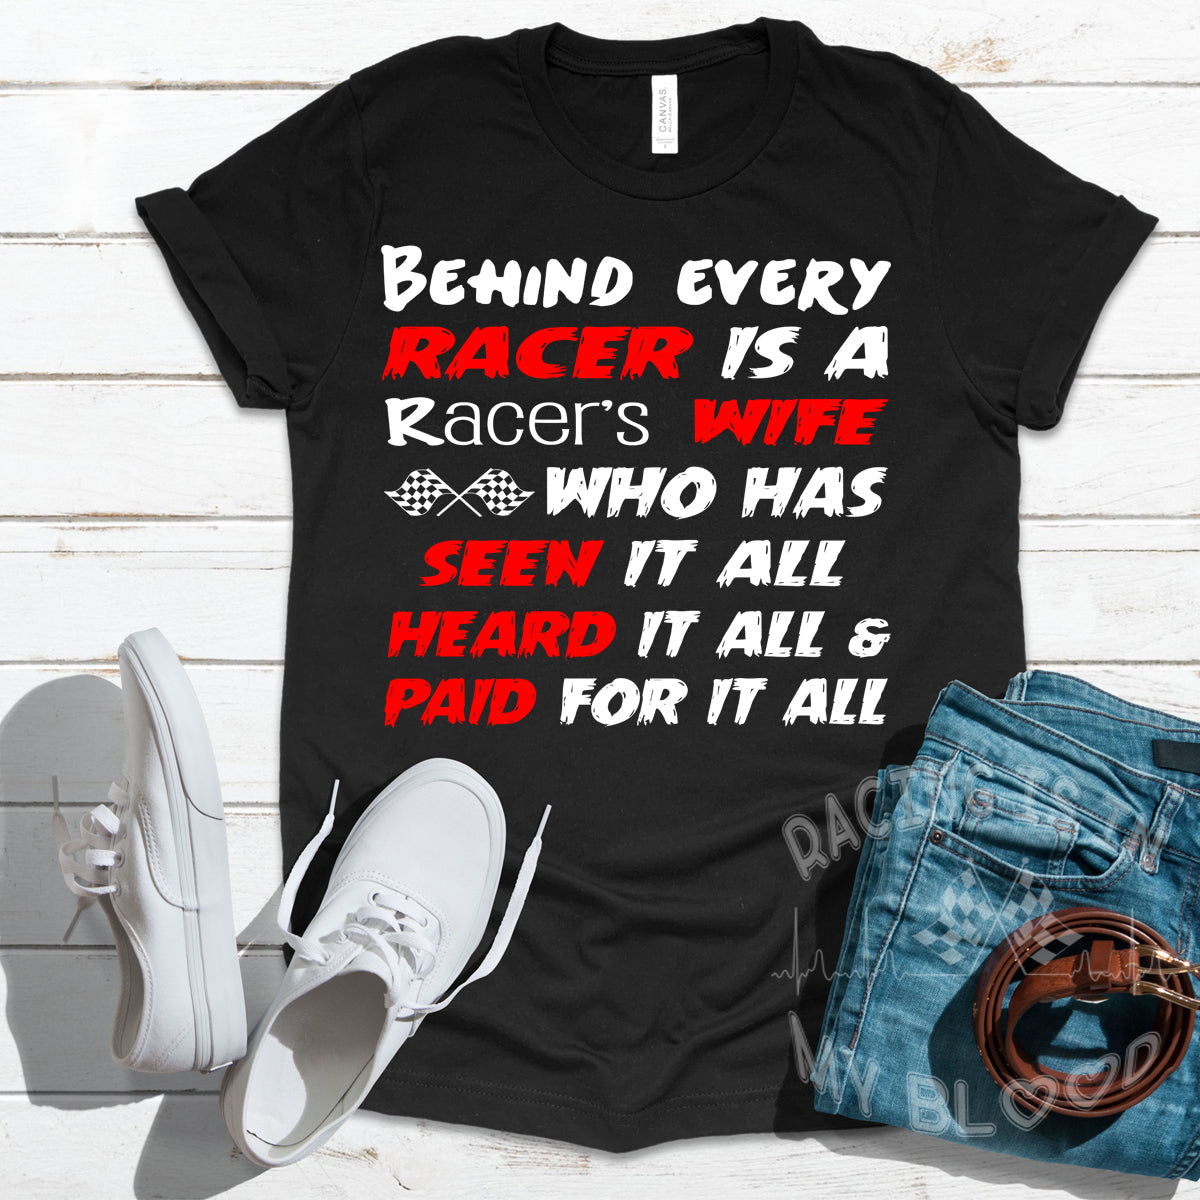 Behind Every Racer Is A Racer's Wife T-Shirts!